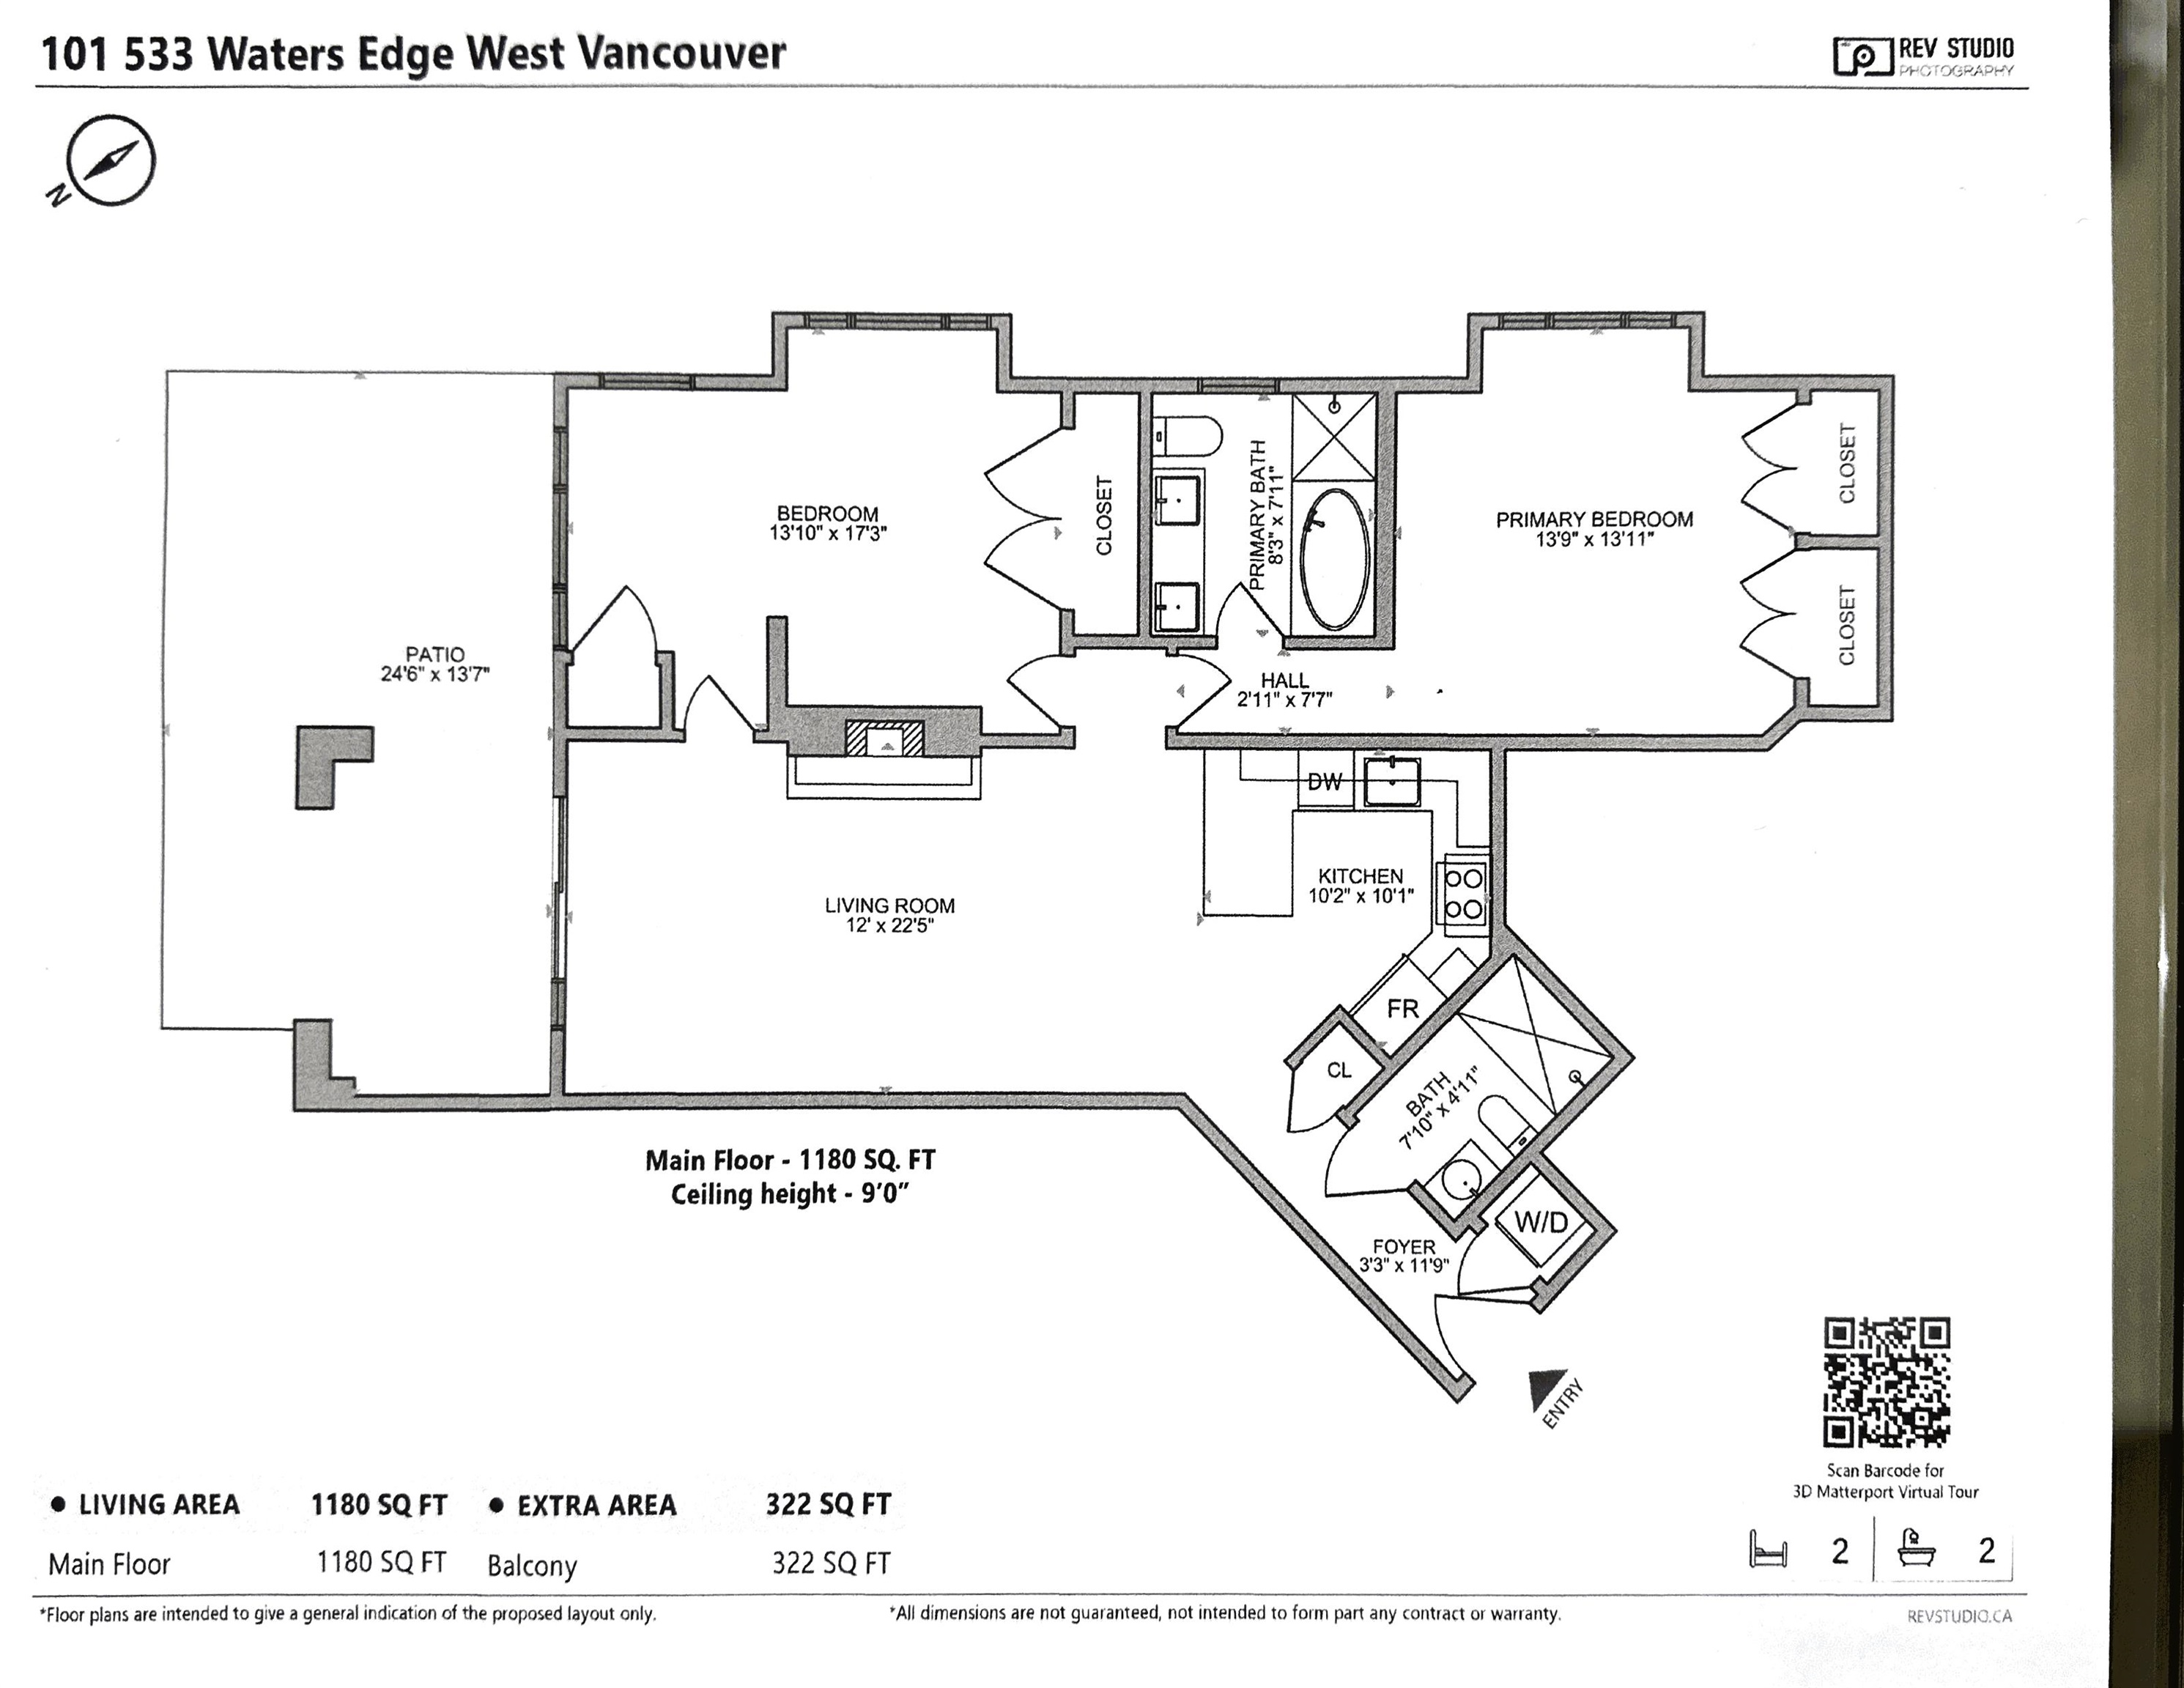 Listing image of 101 533 WATERS EDGE CRESCENT